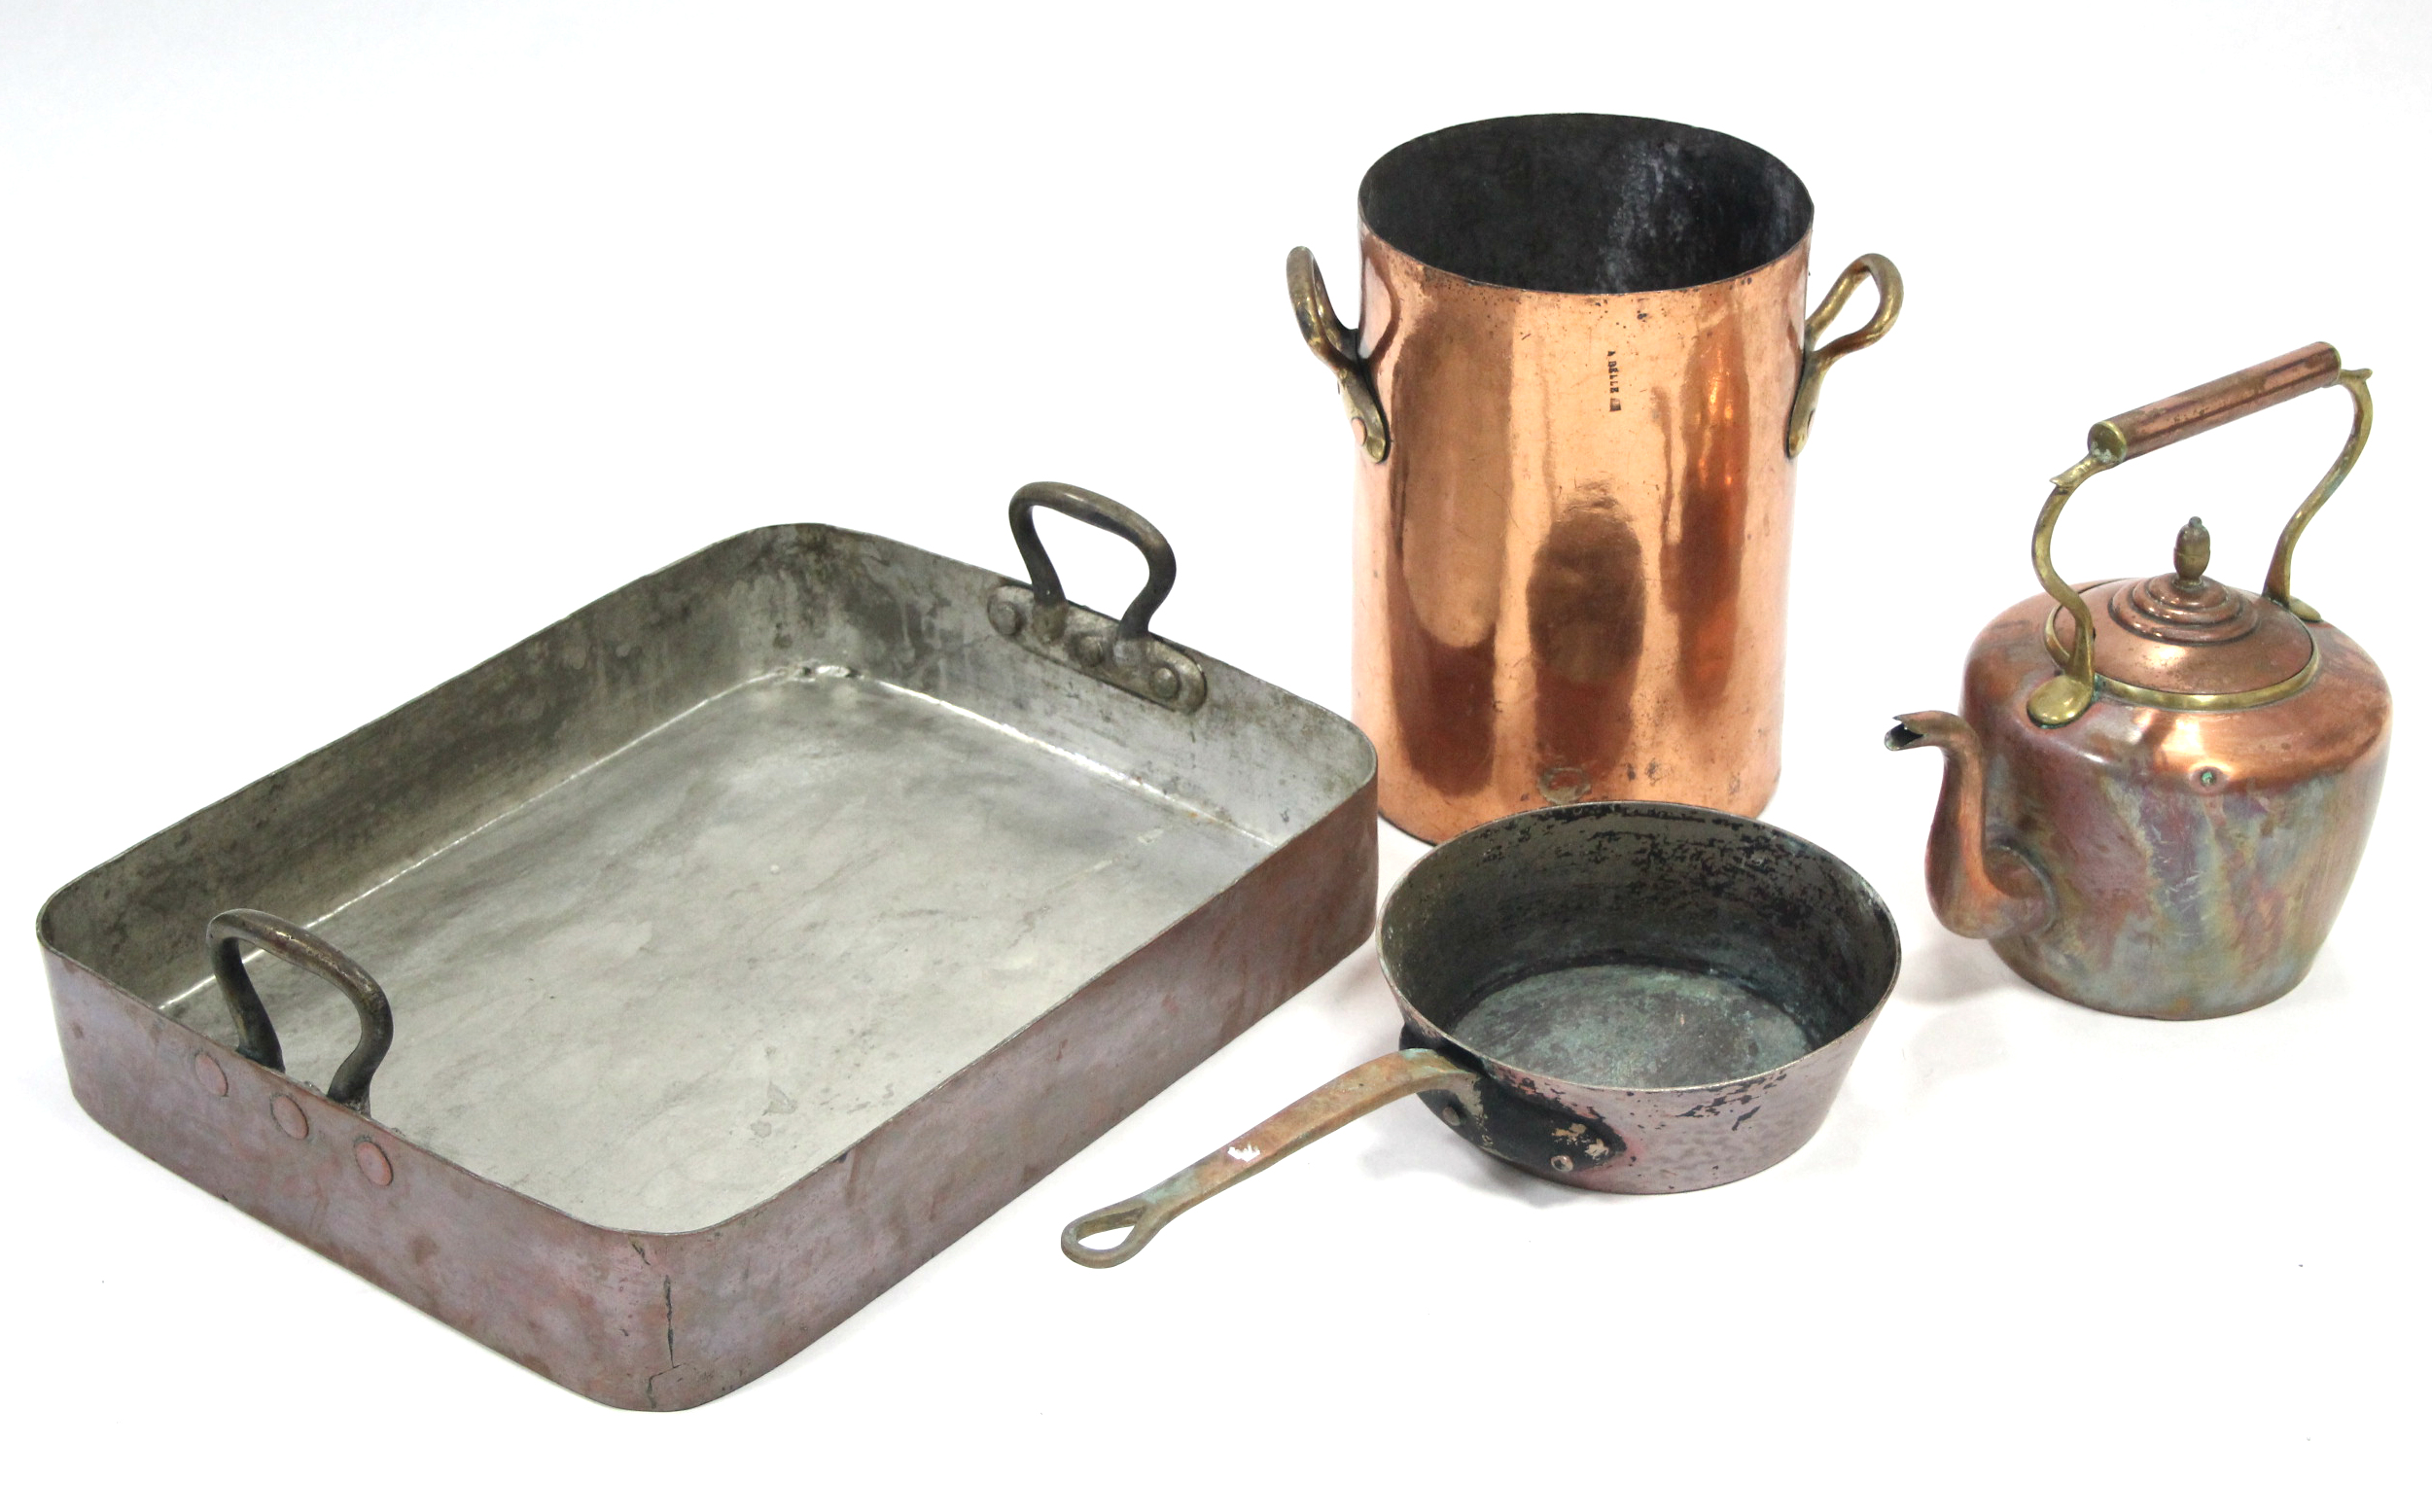 Four items of antique copper kitchenware, including a large roasting tray, a two-handled stock